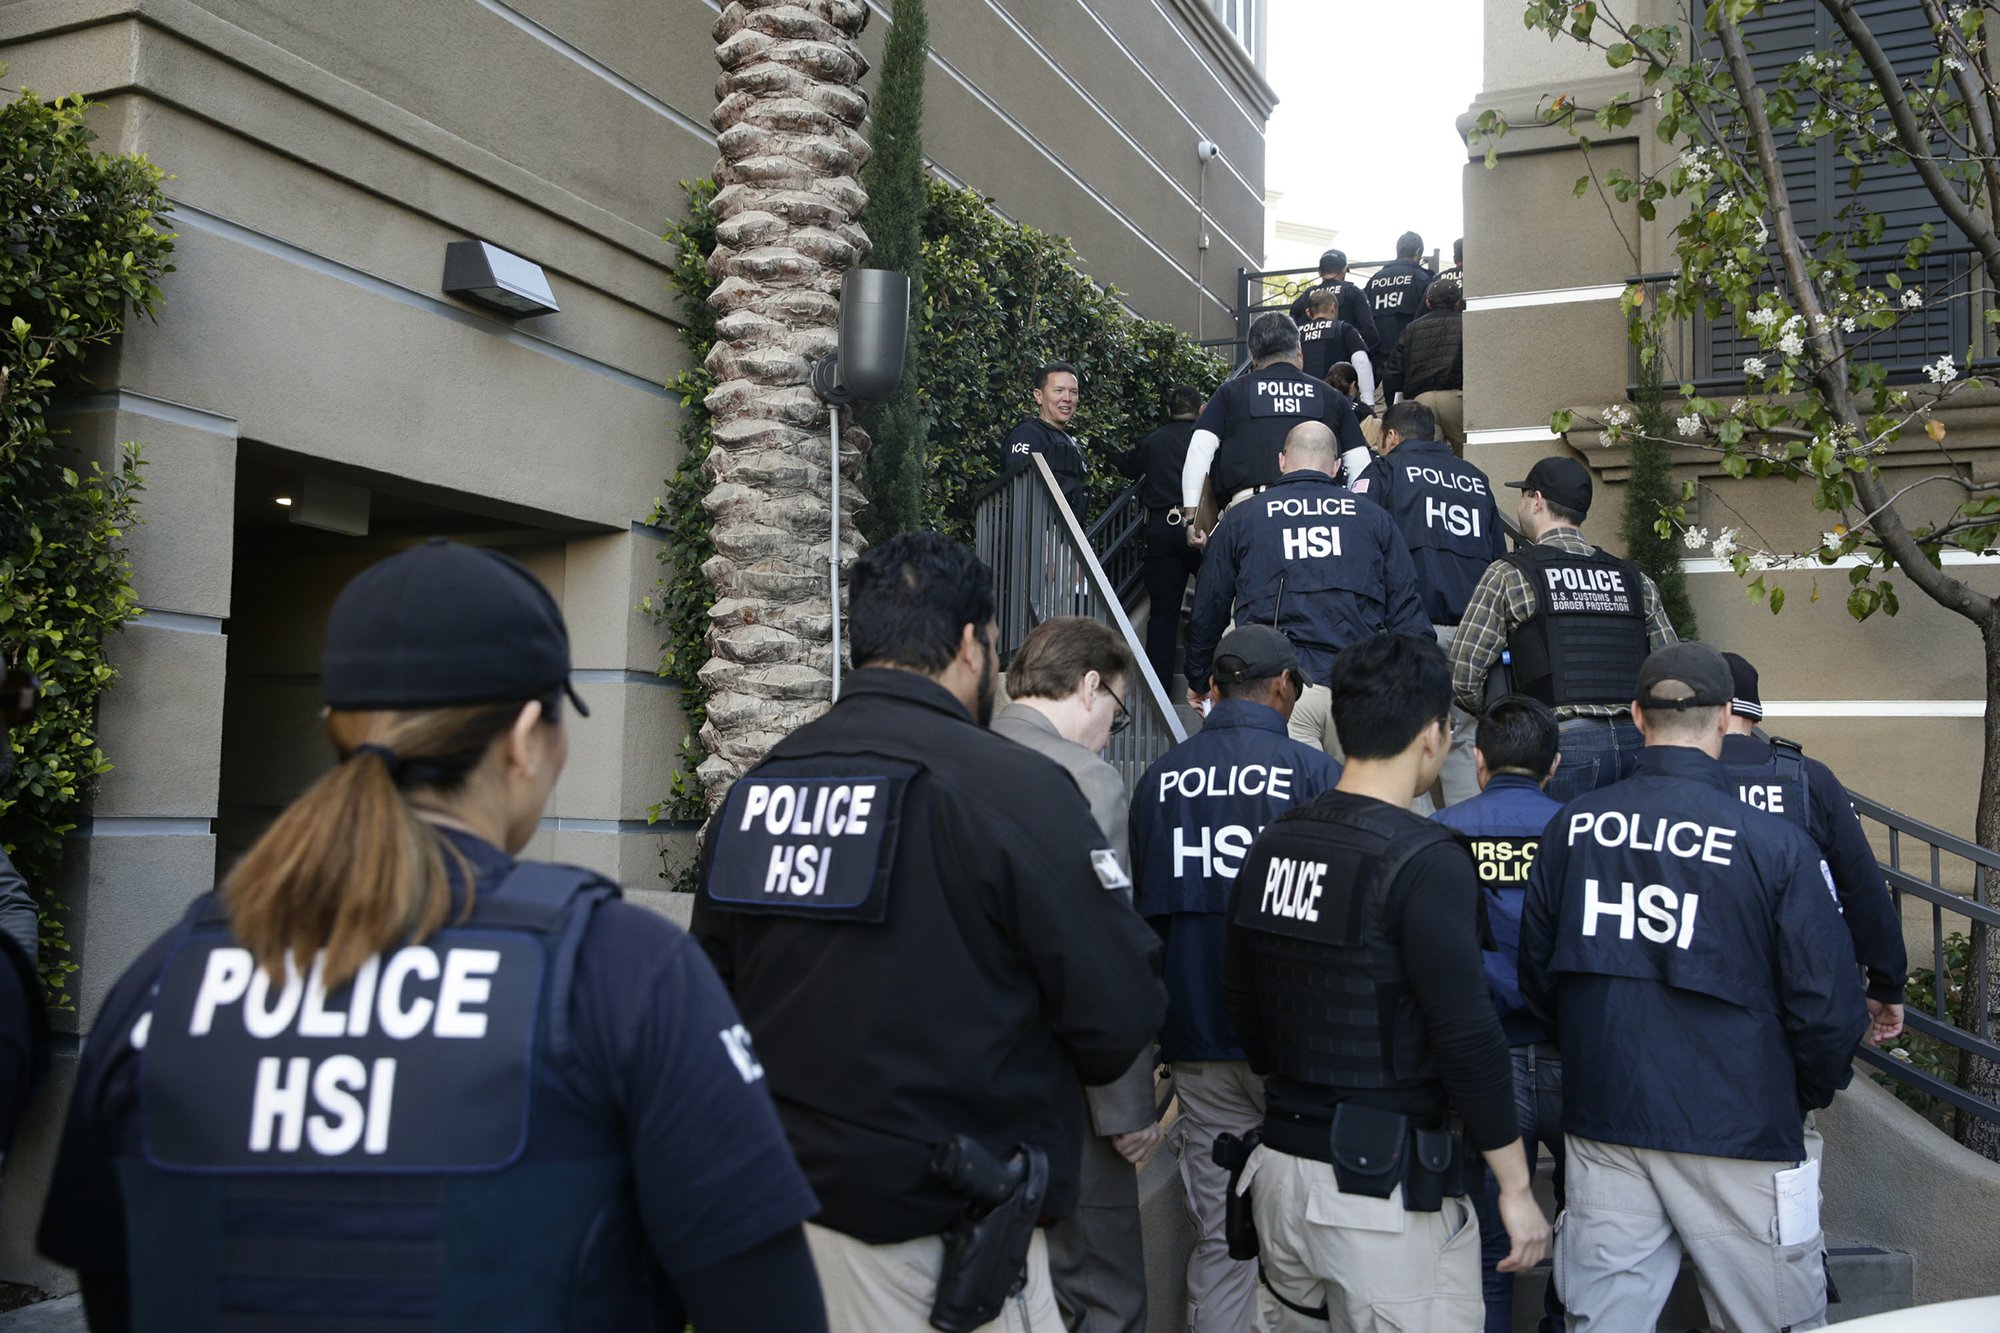 FILE - In this March 3, 2015 file photo, federal agents enter an upscale apartment complex where authorities say a birth tourism business charged pregnant women $50,000 for lodging, food and transportation, in Irvine, California. Photo: AP